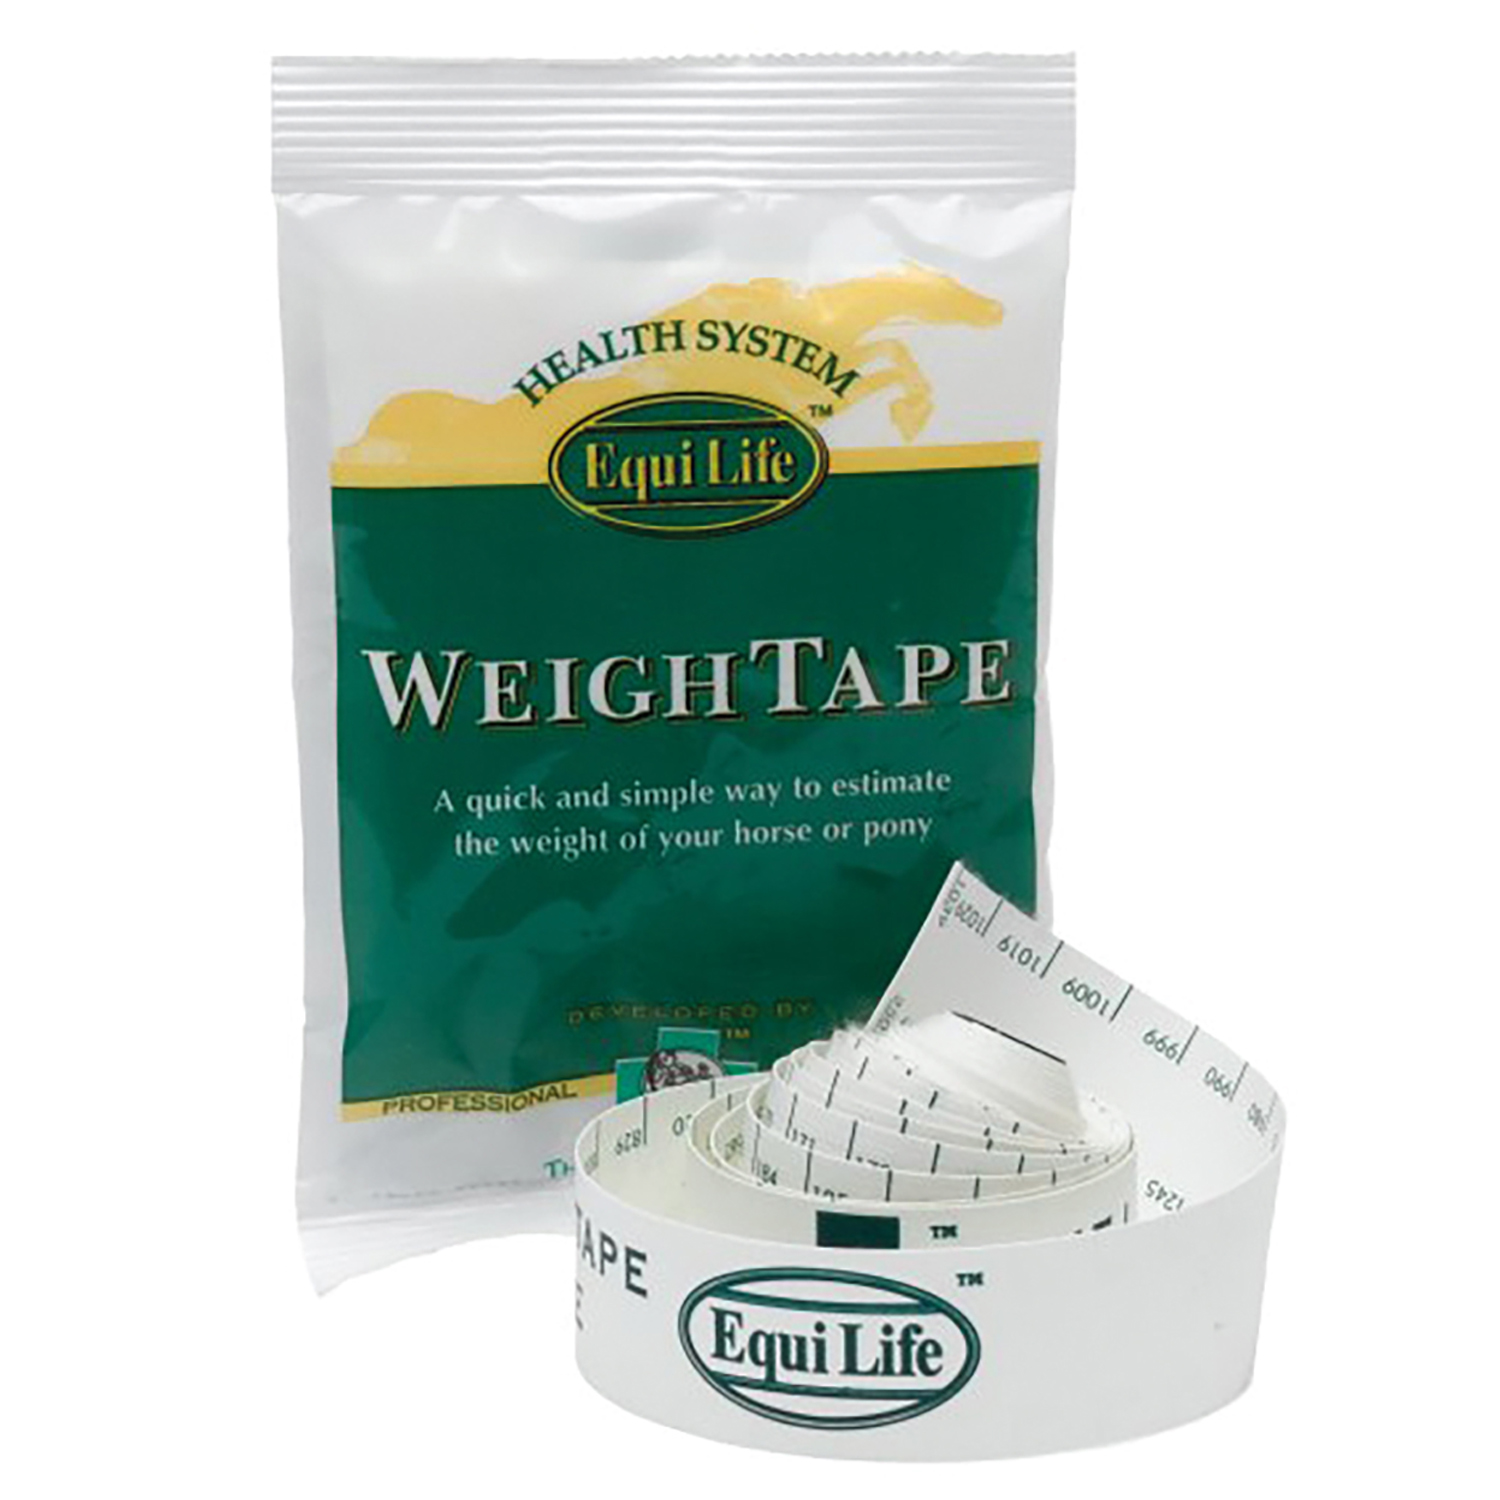 EQUI LIFE WEIGH TAPE